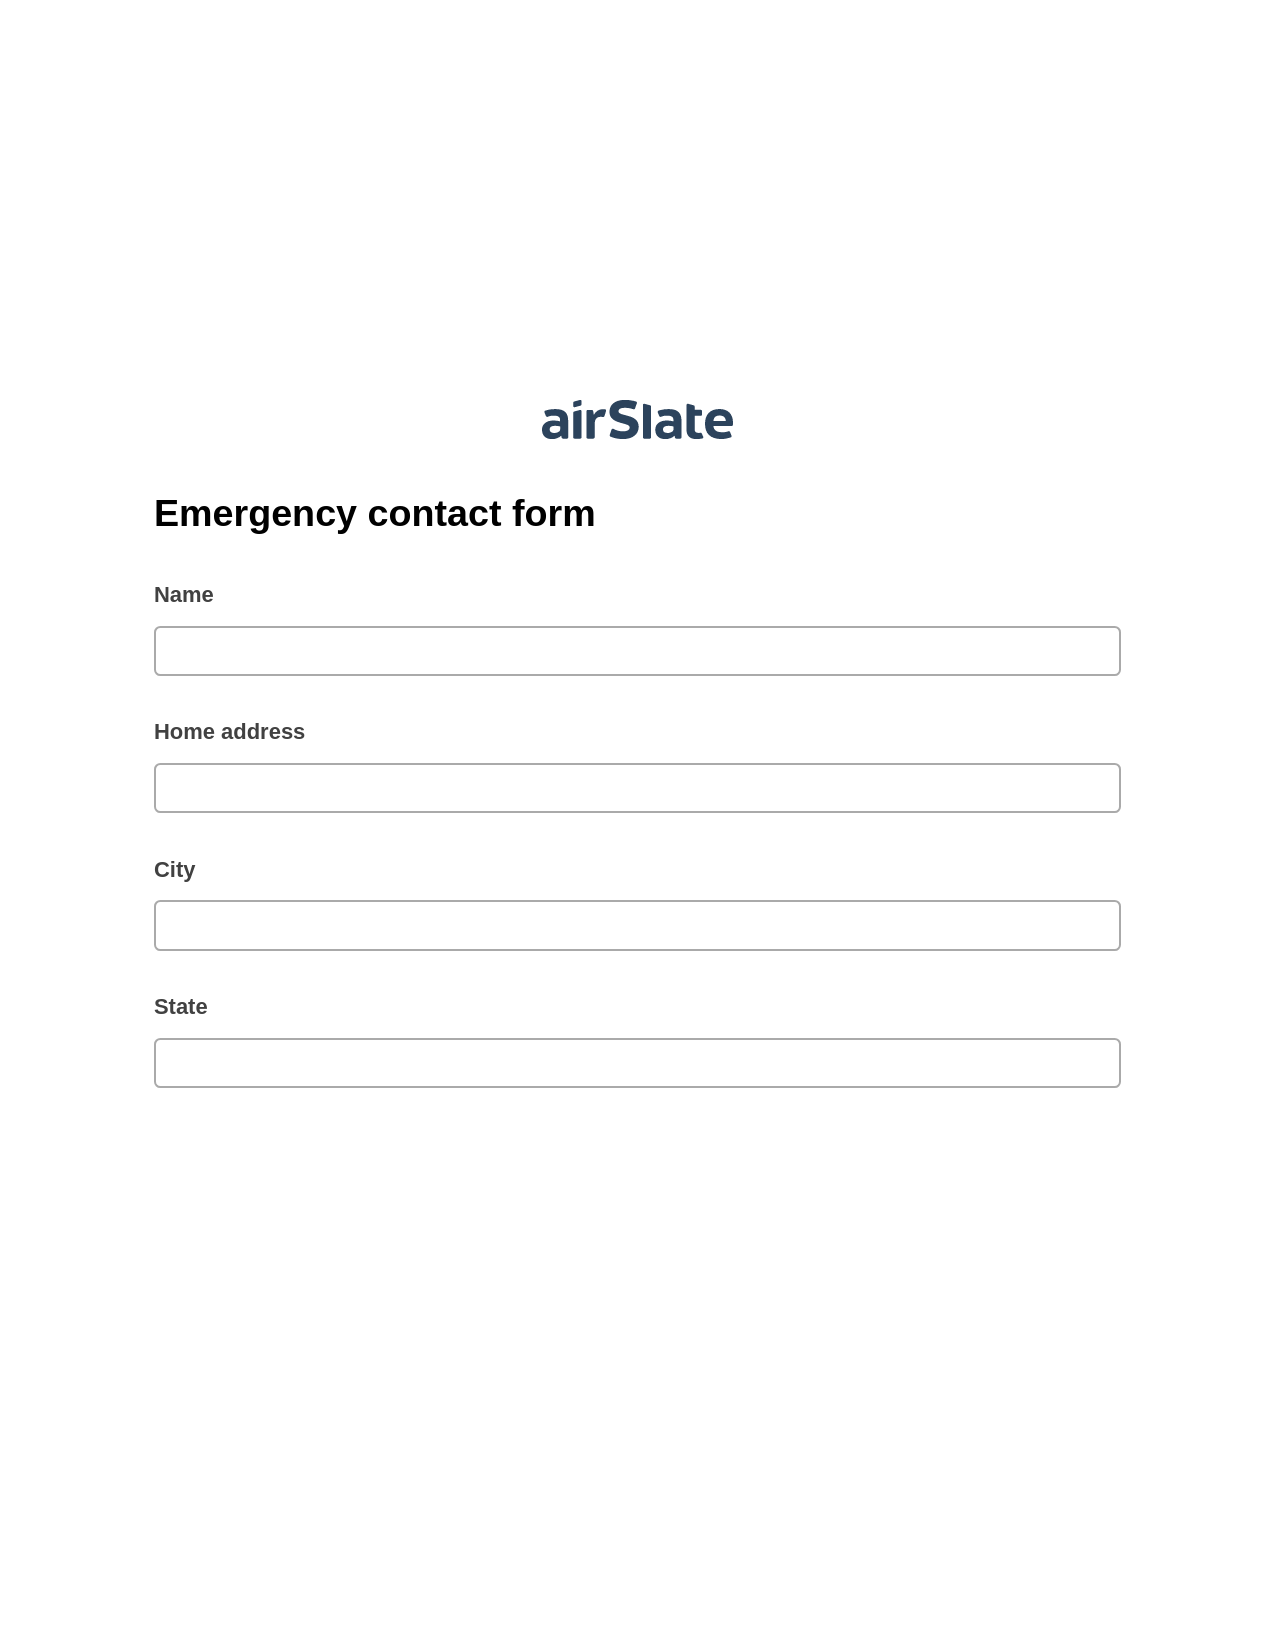 Emergency contact form Pre-fill Slate from MS Dynamics 365 Records Bot, Document Hide Bot, Google Drive Bot